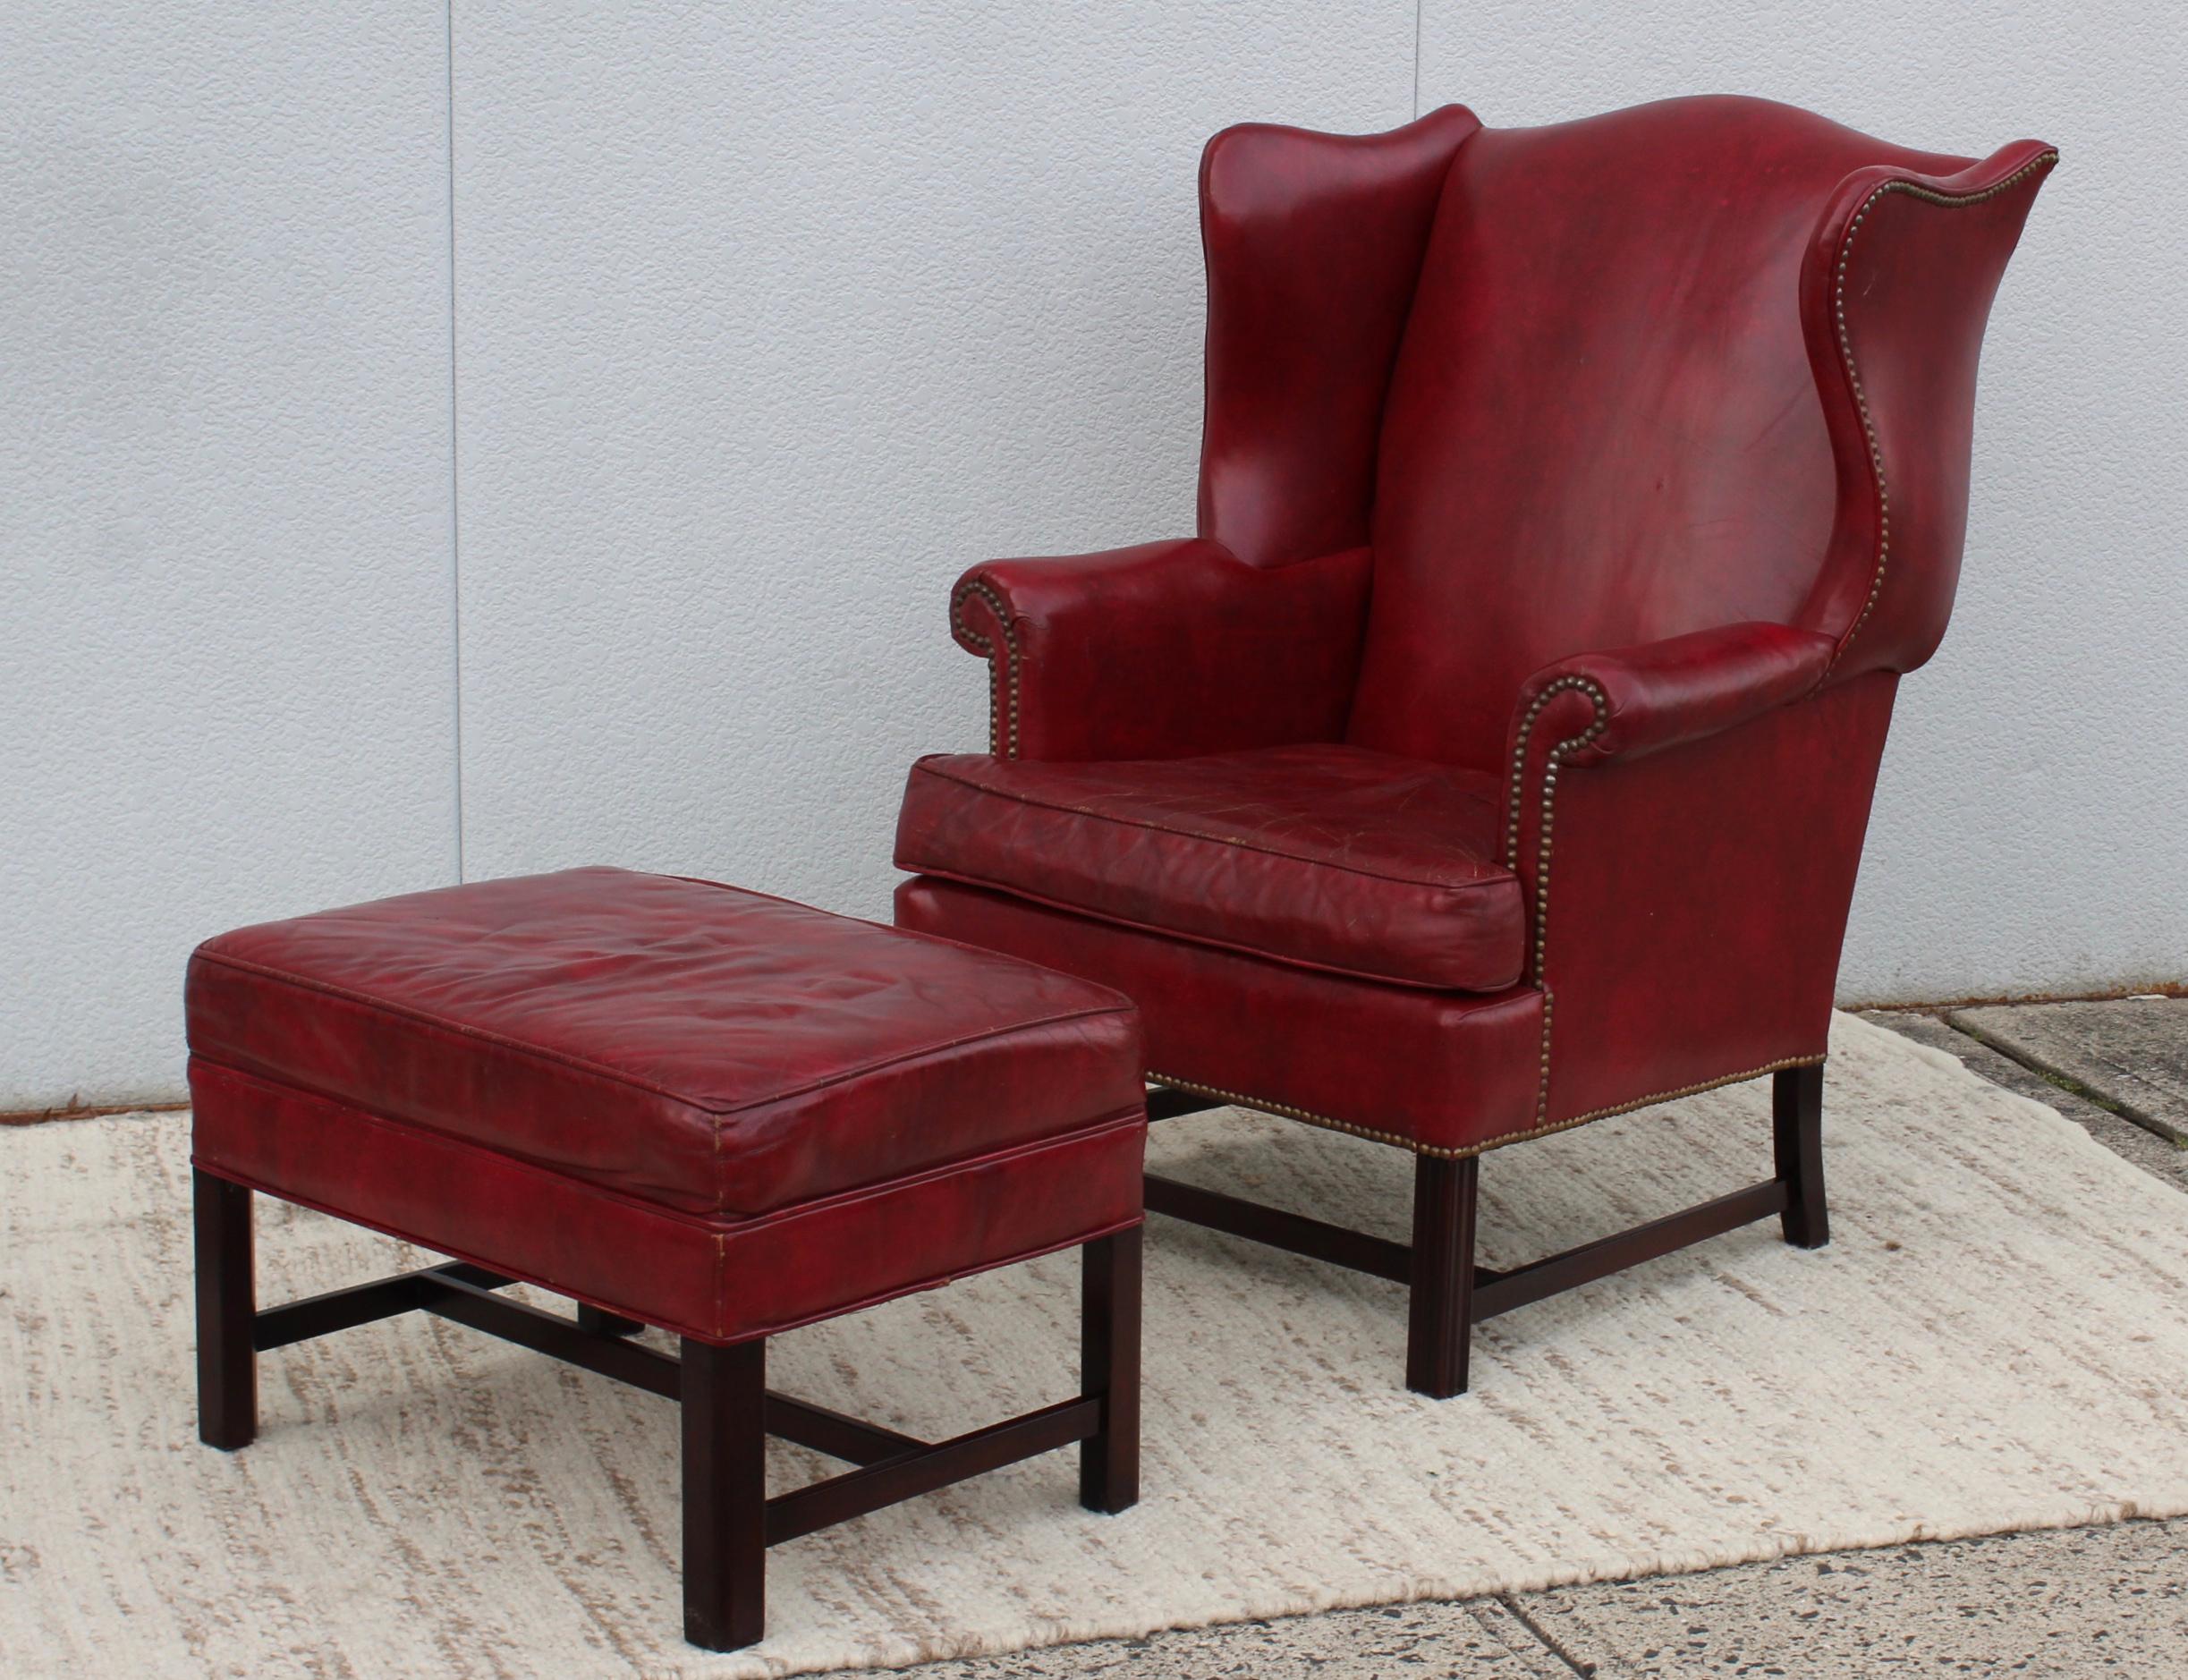 1960's Red Leather Wing-Back Chair and Ottoman by Hickory Chair 1